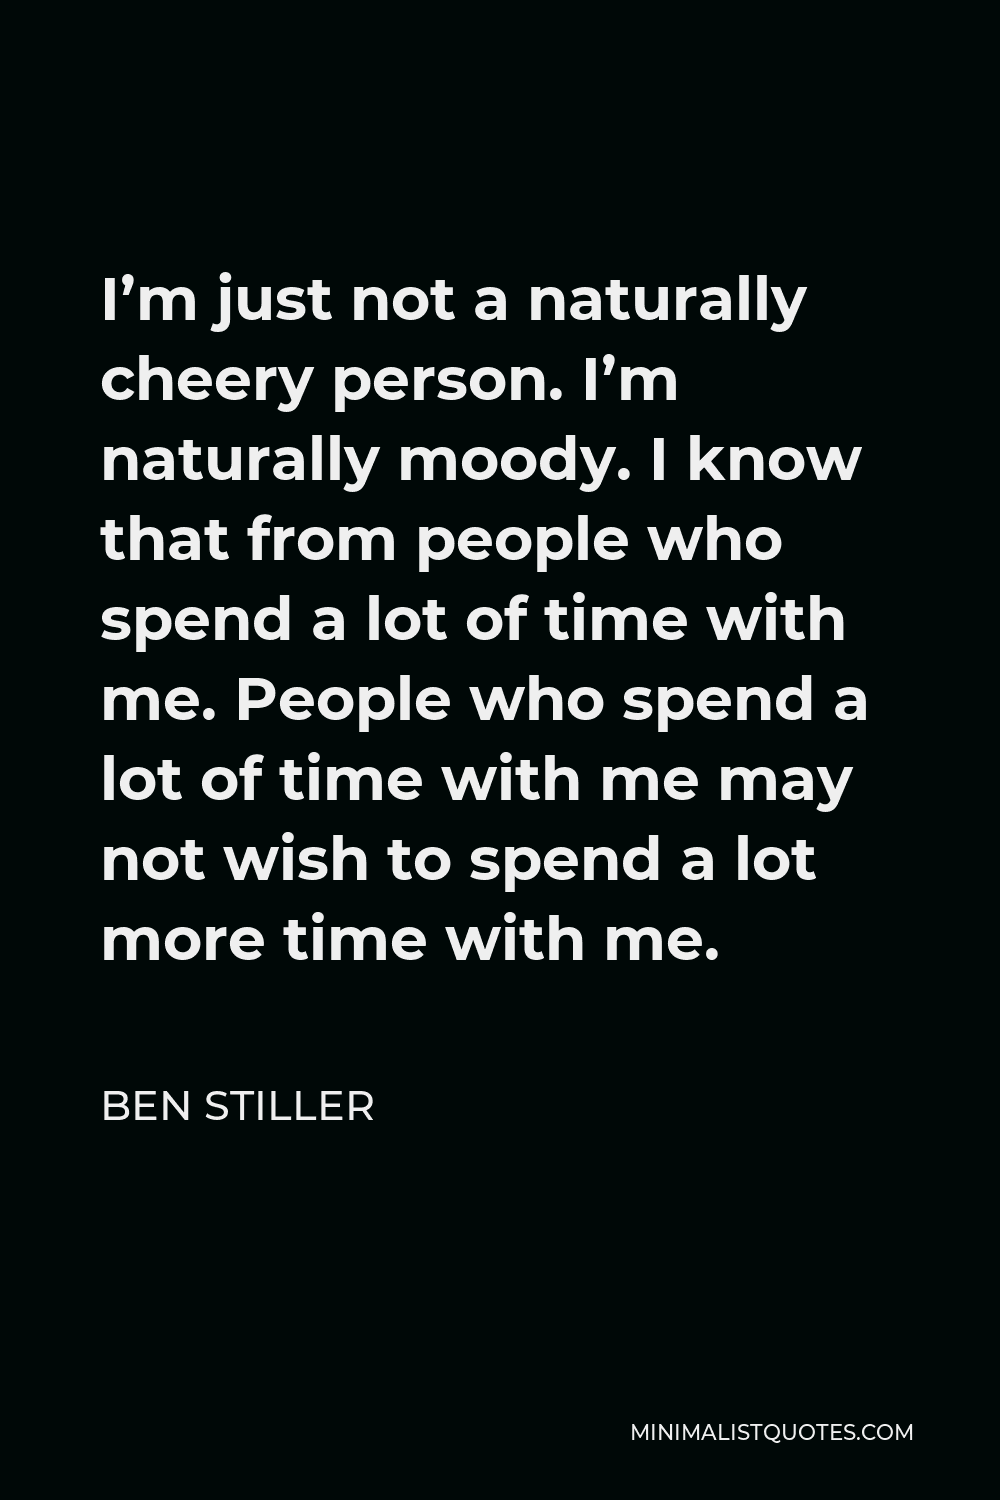 Ben Stiller Quote - I’m just not a naturally cheery person. I’m naturally moody. I know that from people who spend a lot of time with me. People who spend a lot of time with me may not wish to spend a lot more time with me.